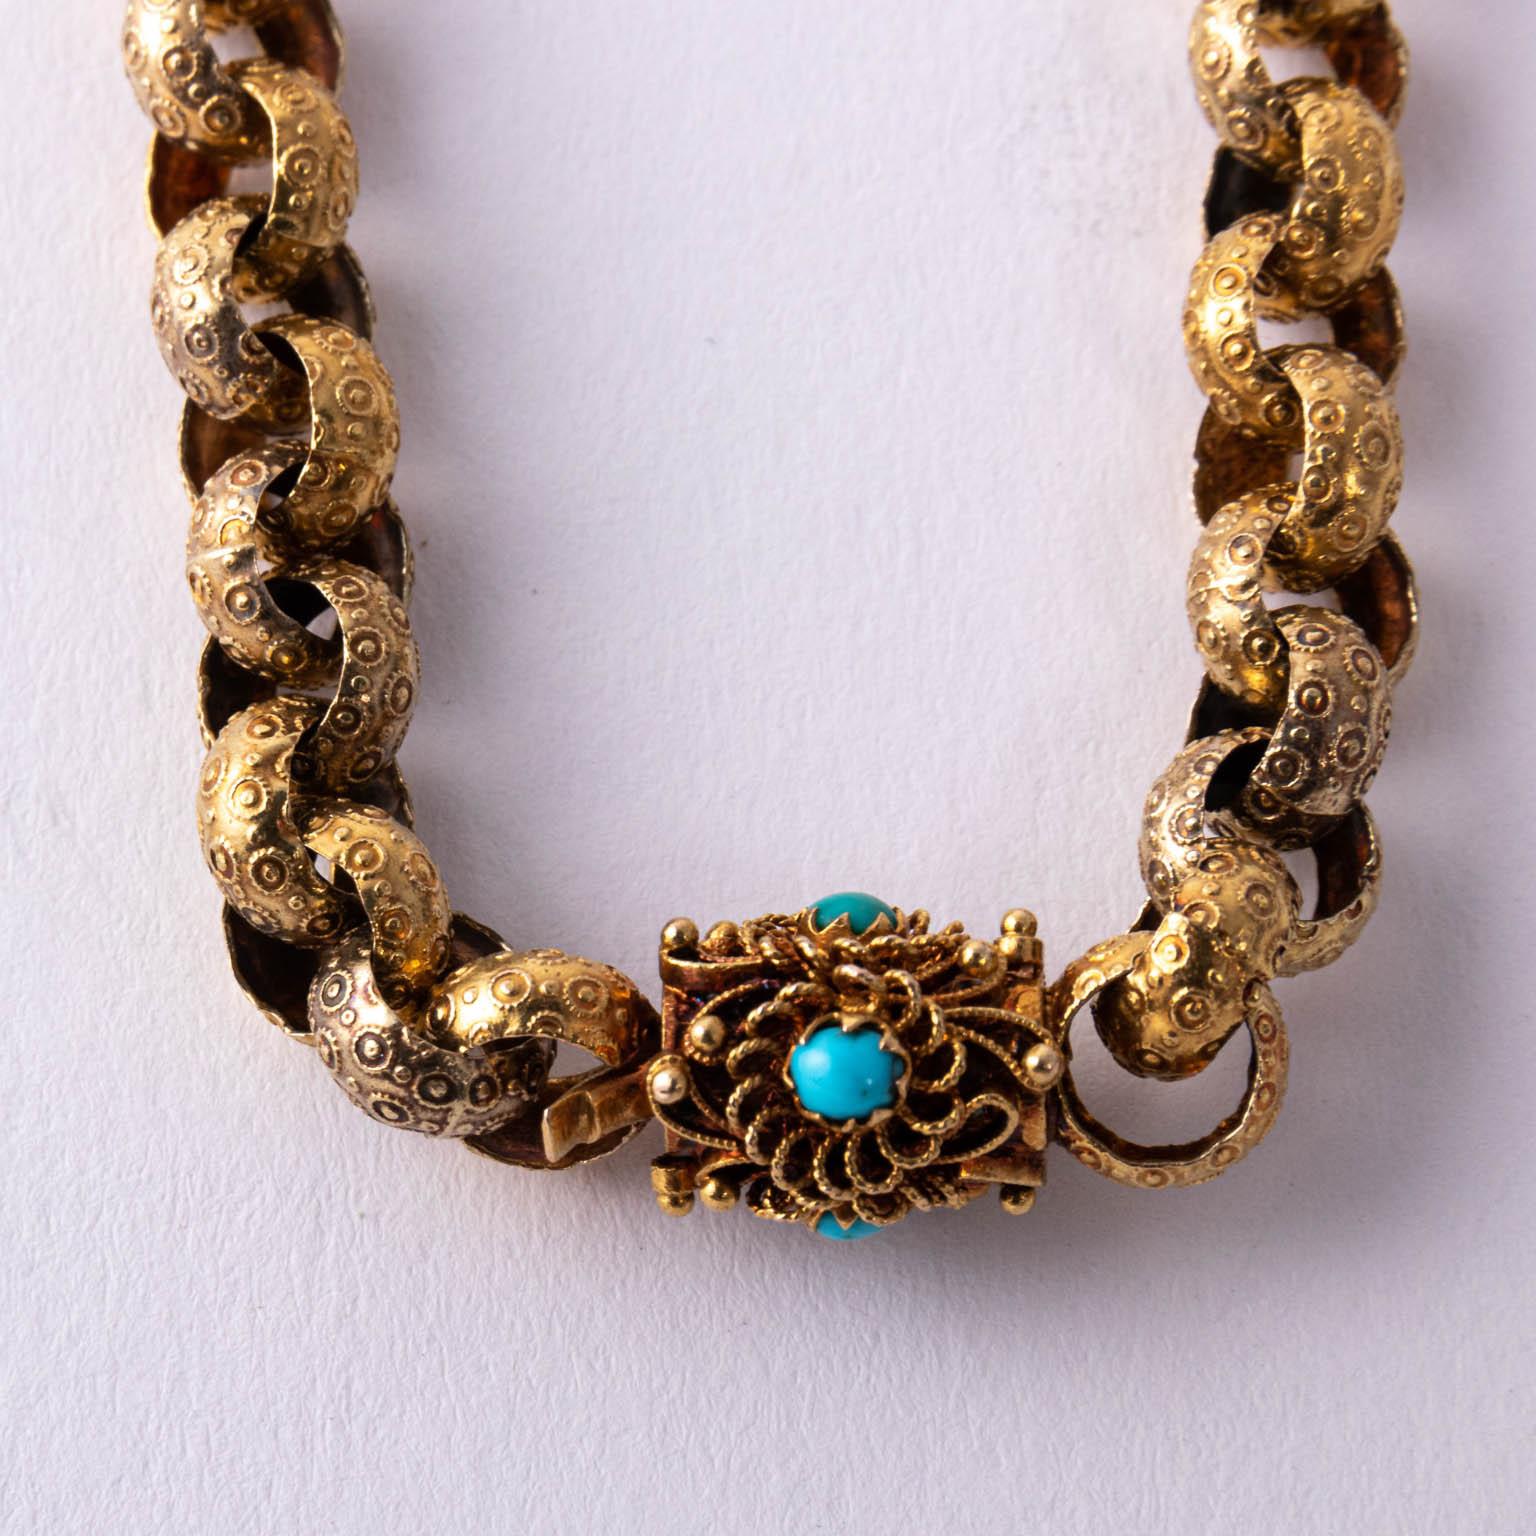 Circa 1870s Victorian necklace from England. Tested to be at least 14 karat to 15 karat. The necklace has large Rollo links of 7.5 mm. Each link is decorated with circles. It finishes with an Etruscan revival style filigree clasp with tiny turquoise